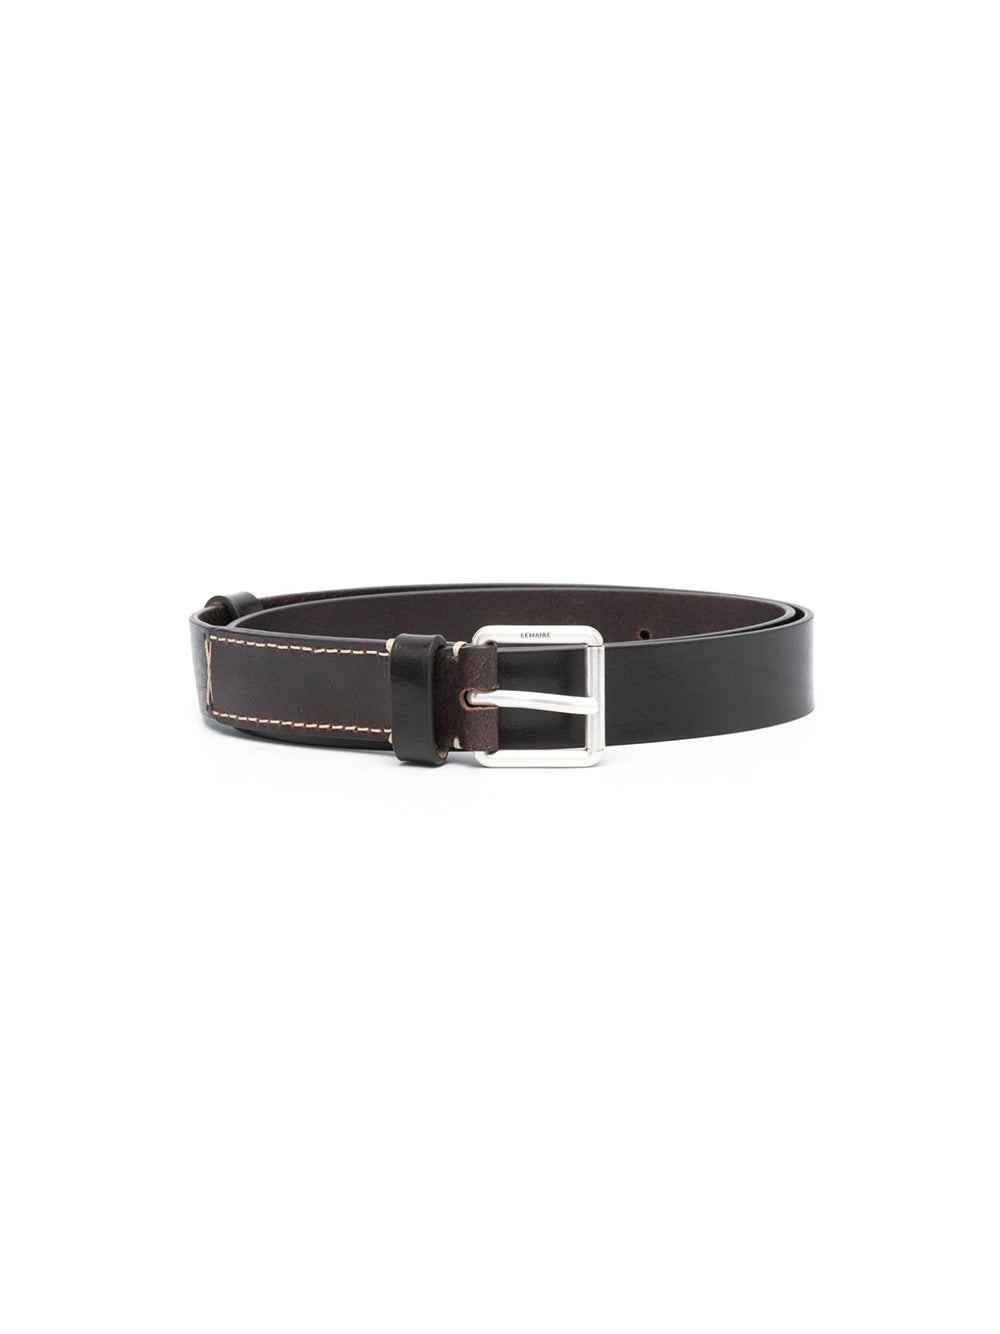 Brown Belt with Visible Black Stitching